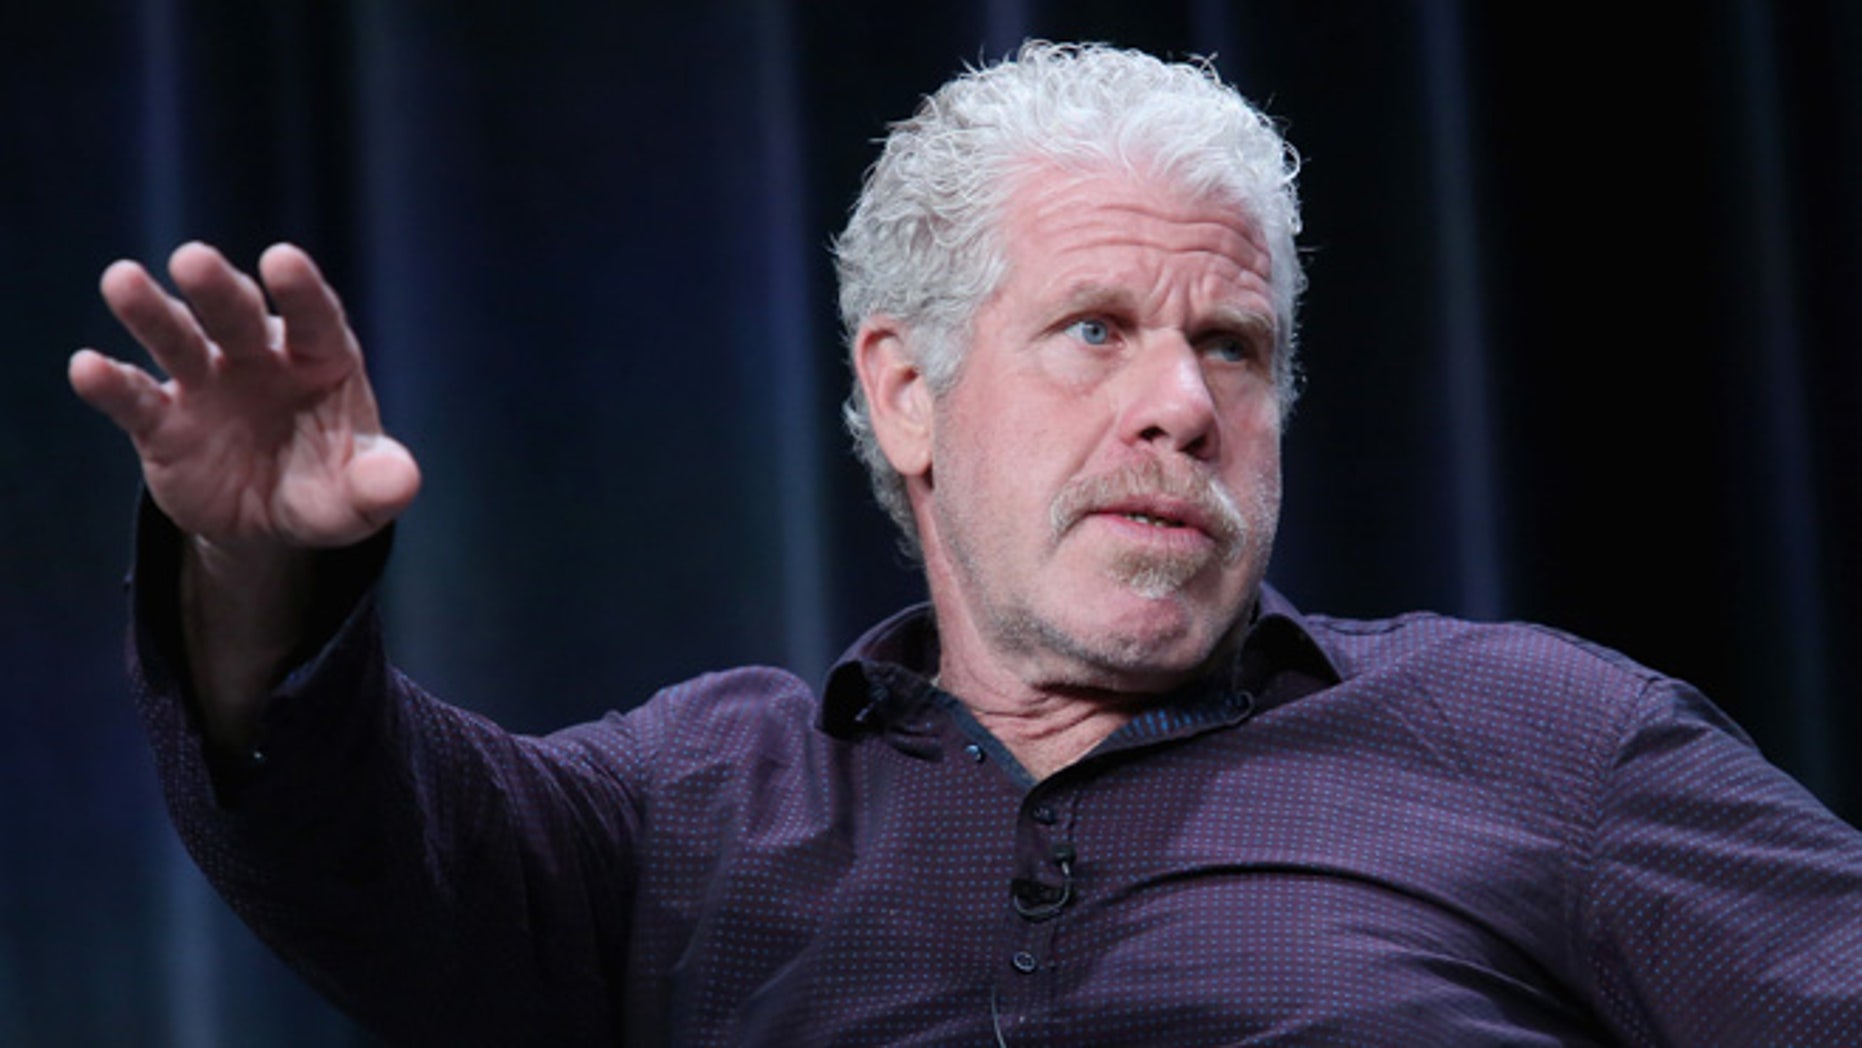 Ron Perlman compares GOP lawmakers to the KKK in wake of Steve King controversy